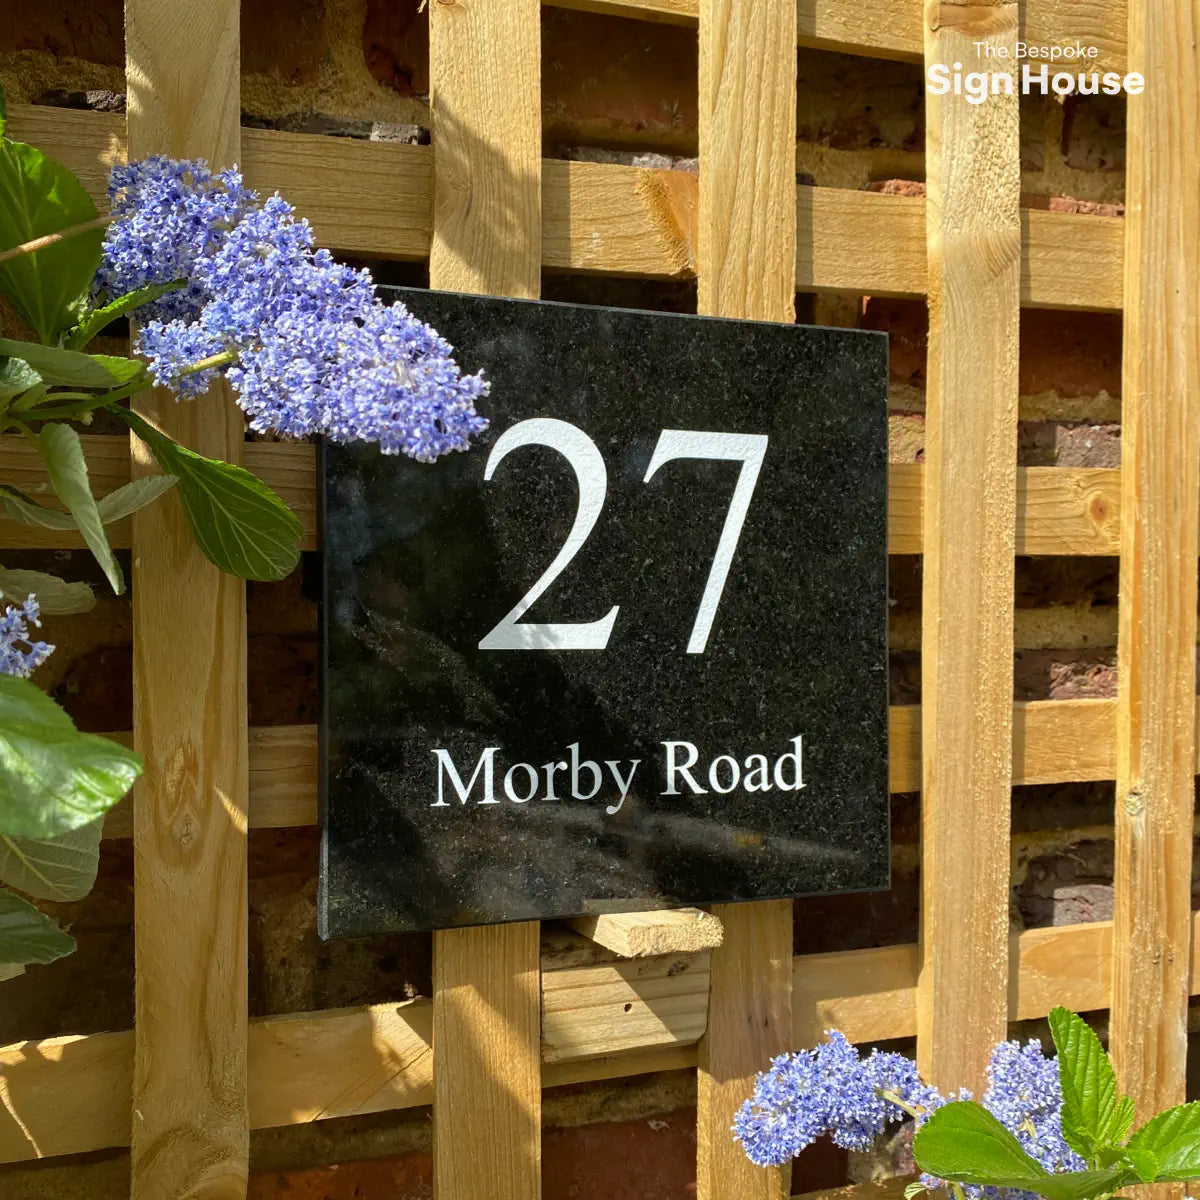 square granite sign with white 27 and road name called Morbys Road